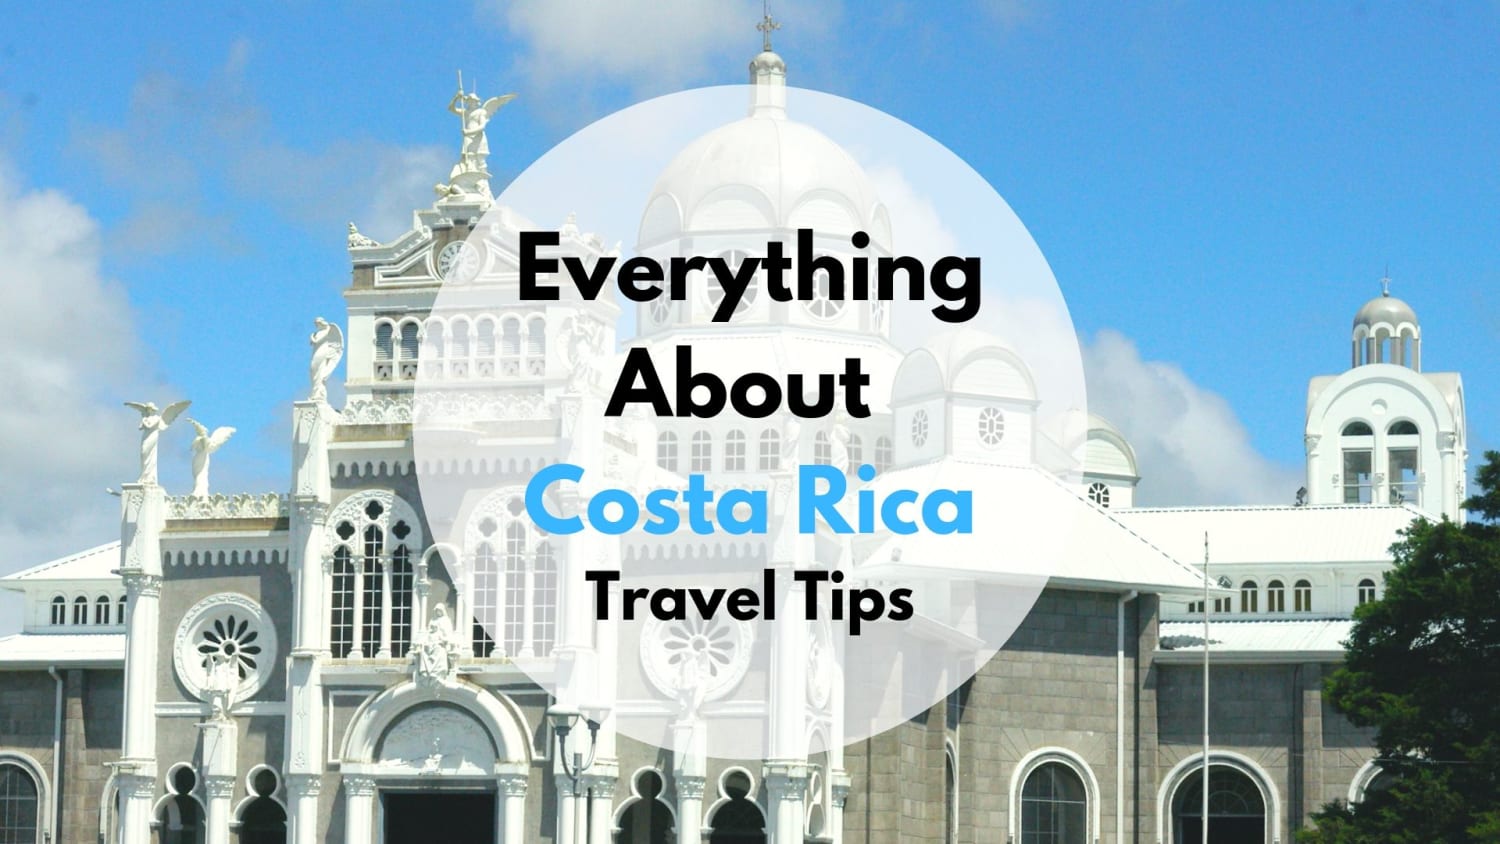 Best Travel Tips for Costa Rica San Jose - Weather to Safety